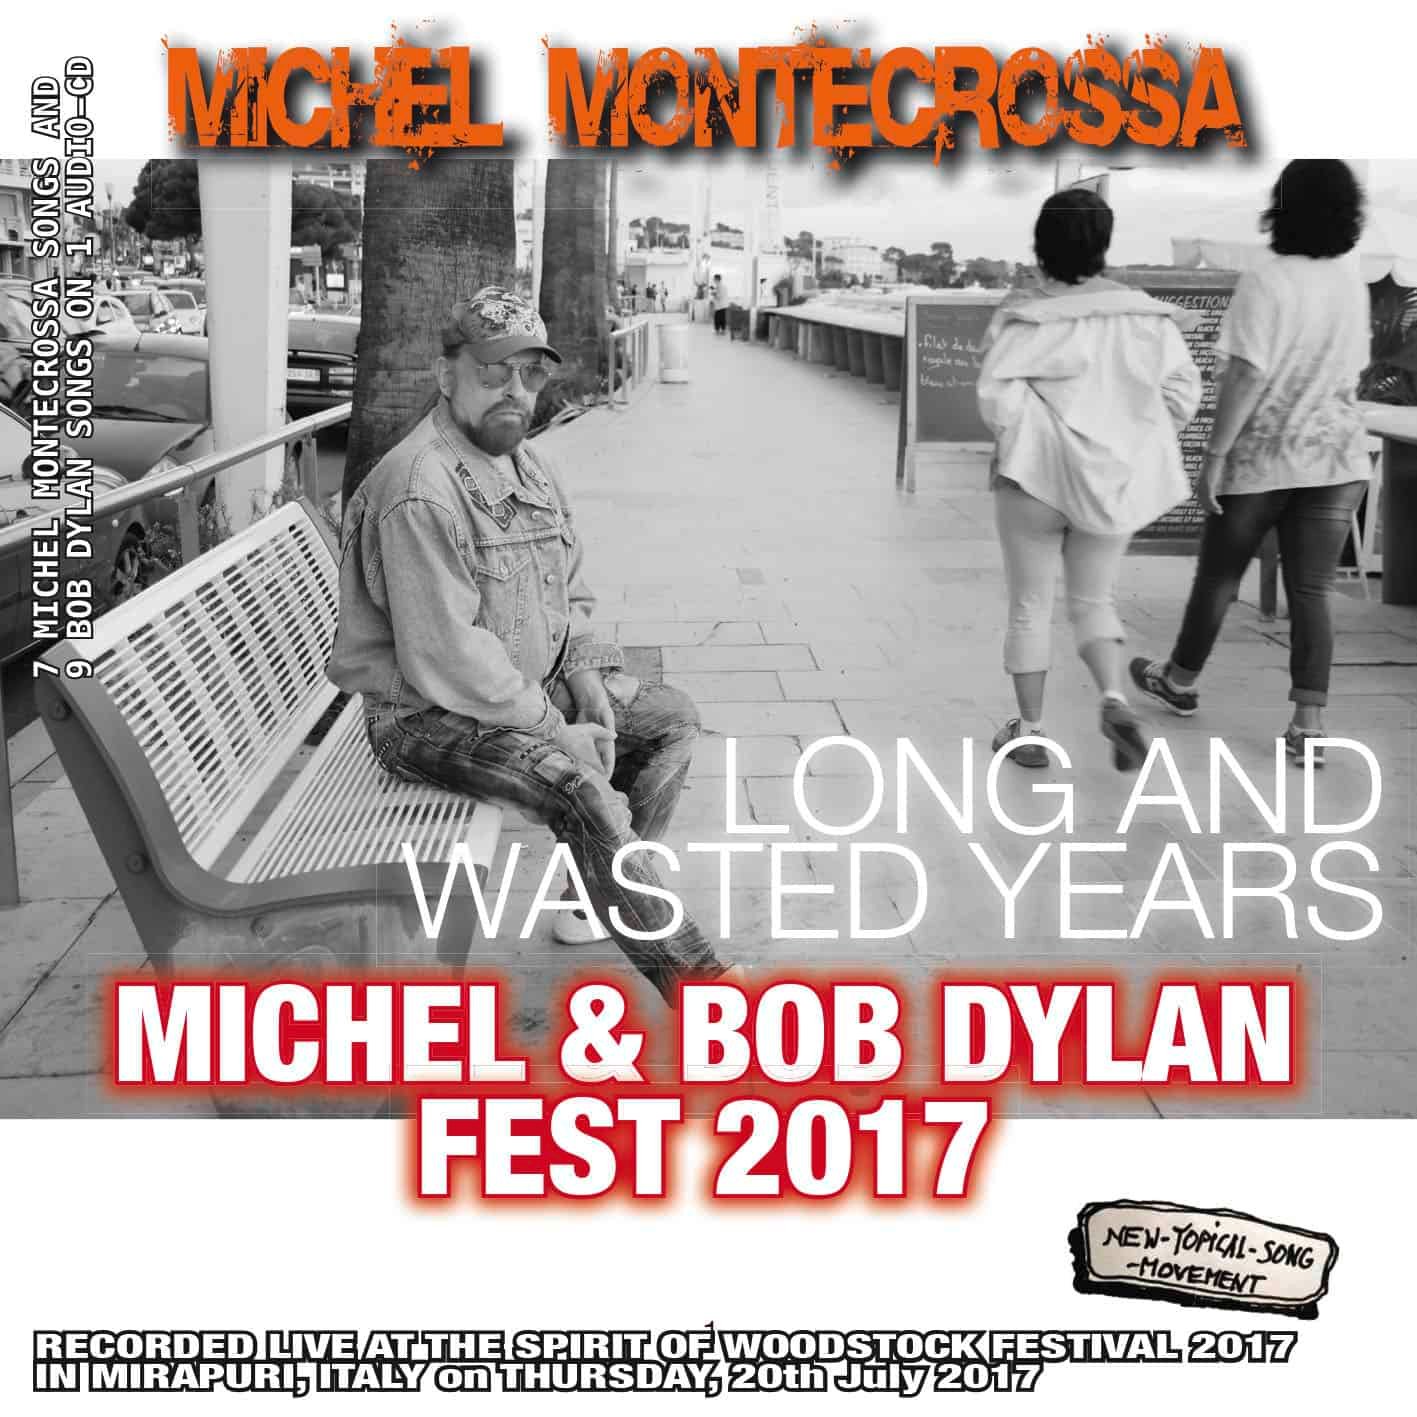 Long And Wasted Years - Michel Montecrossa's Michel & Bob Dylan Fest 2017